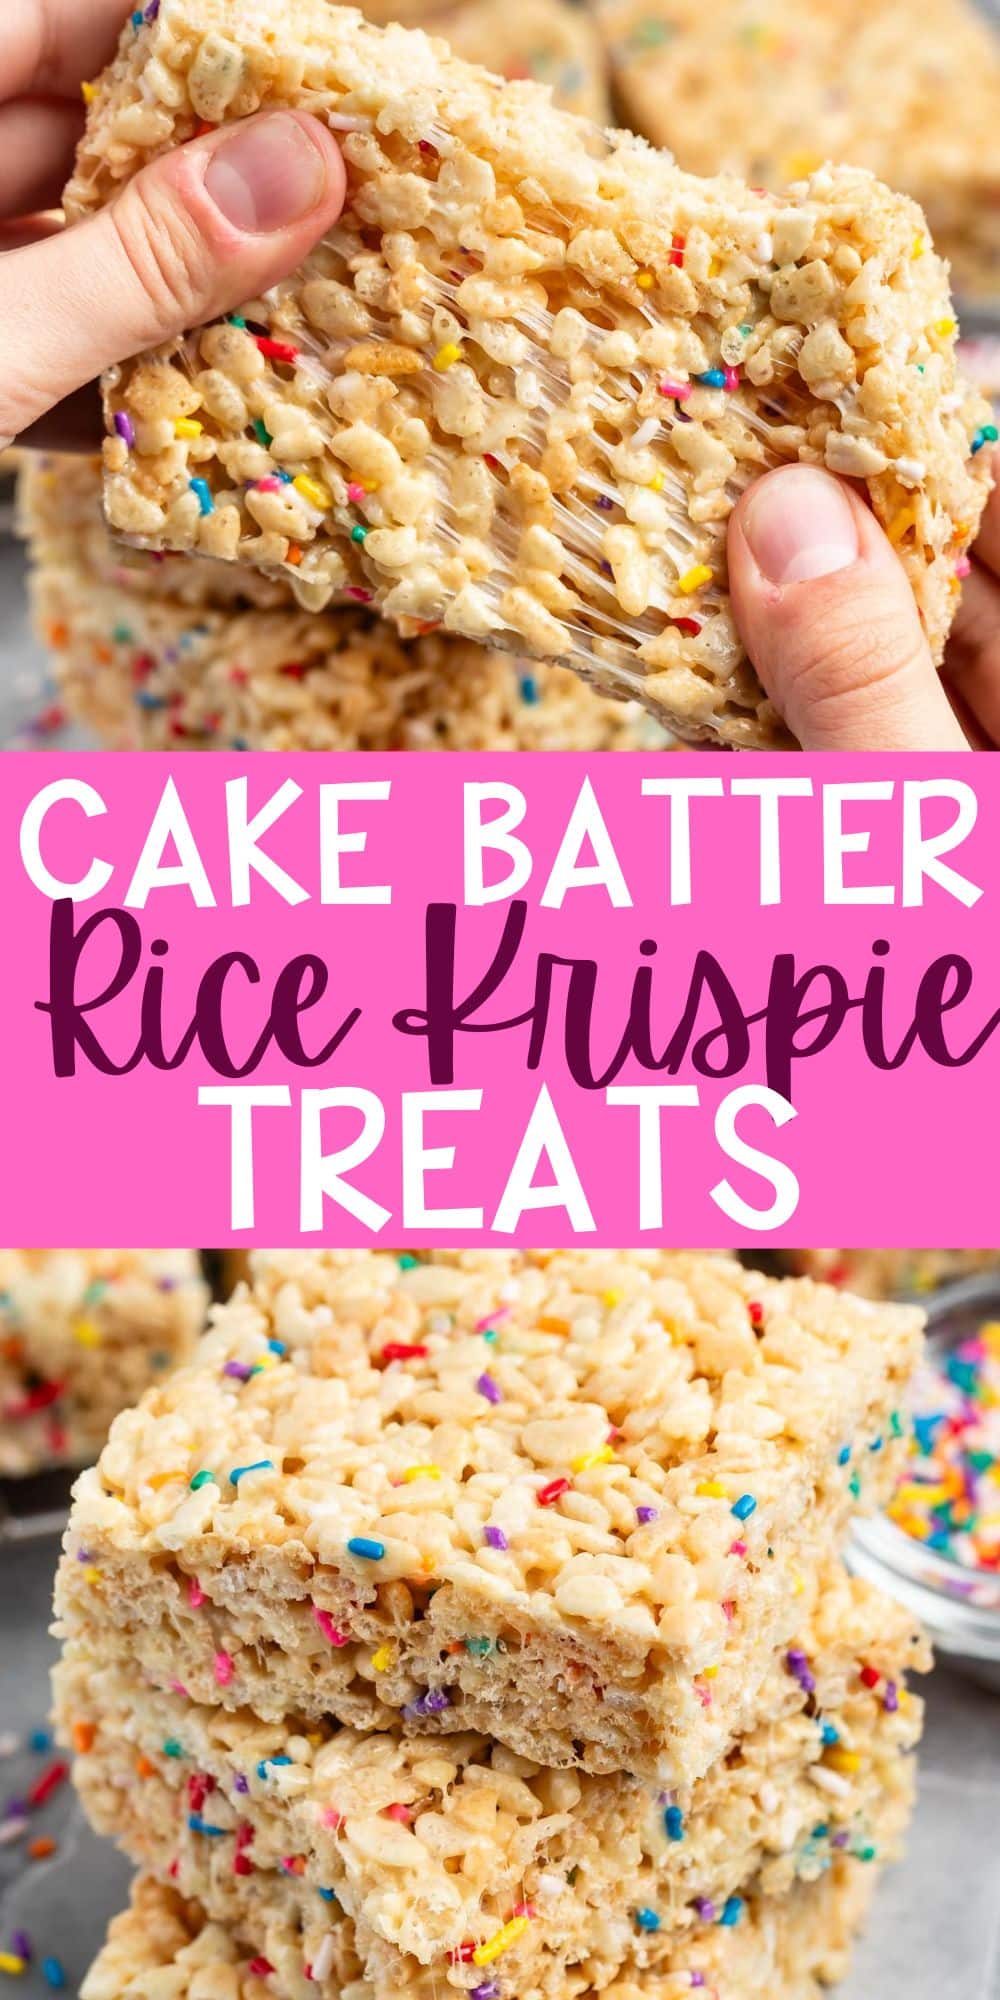 two photos of hand holding Rice Krispie treats with sprinkles baked in with words on the image.